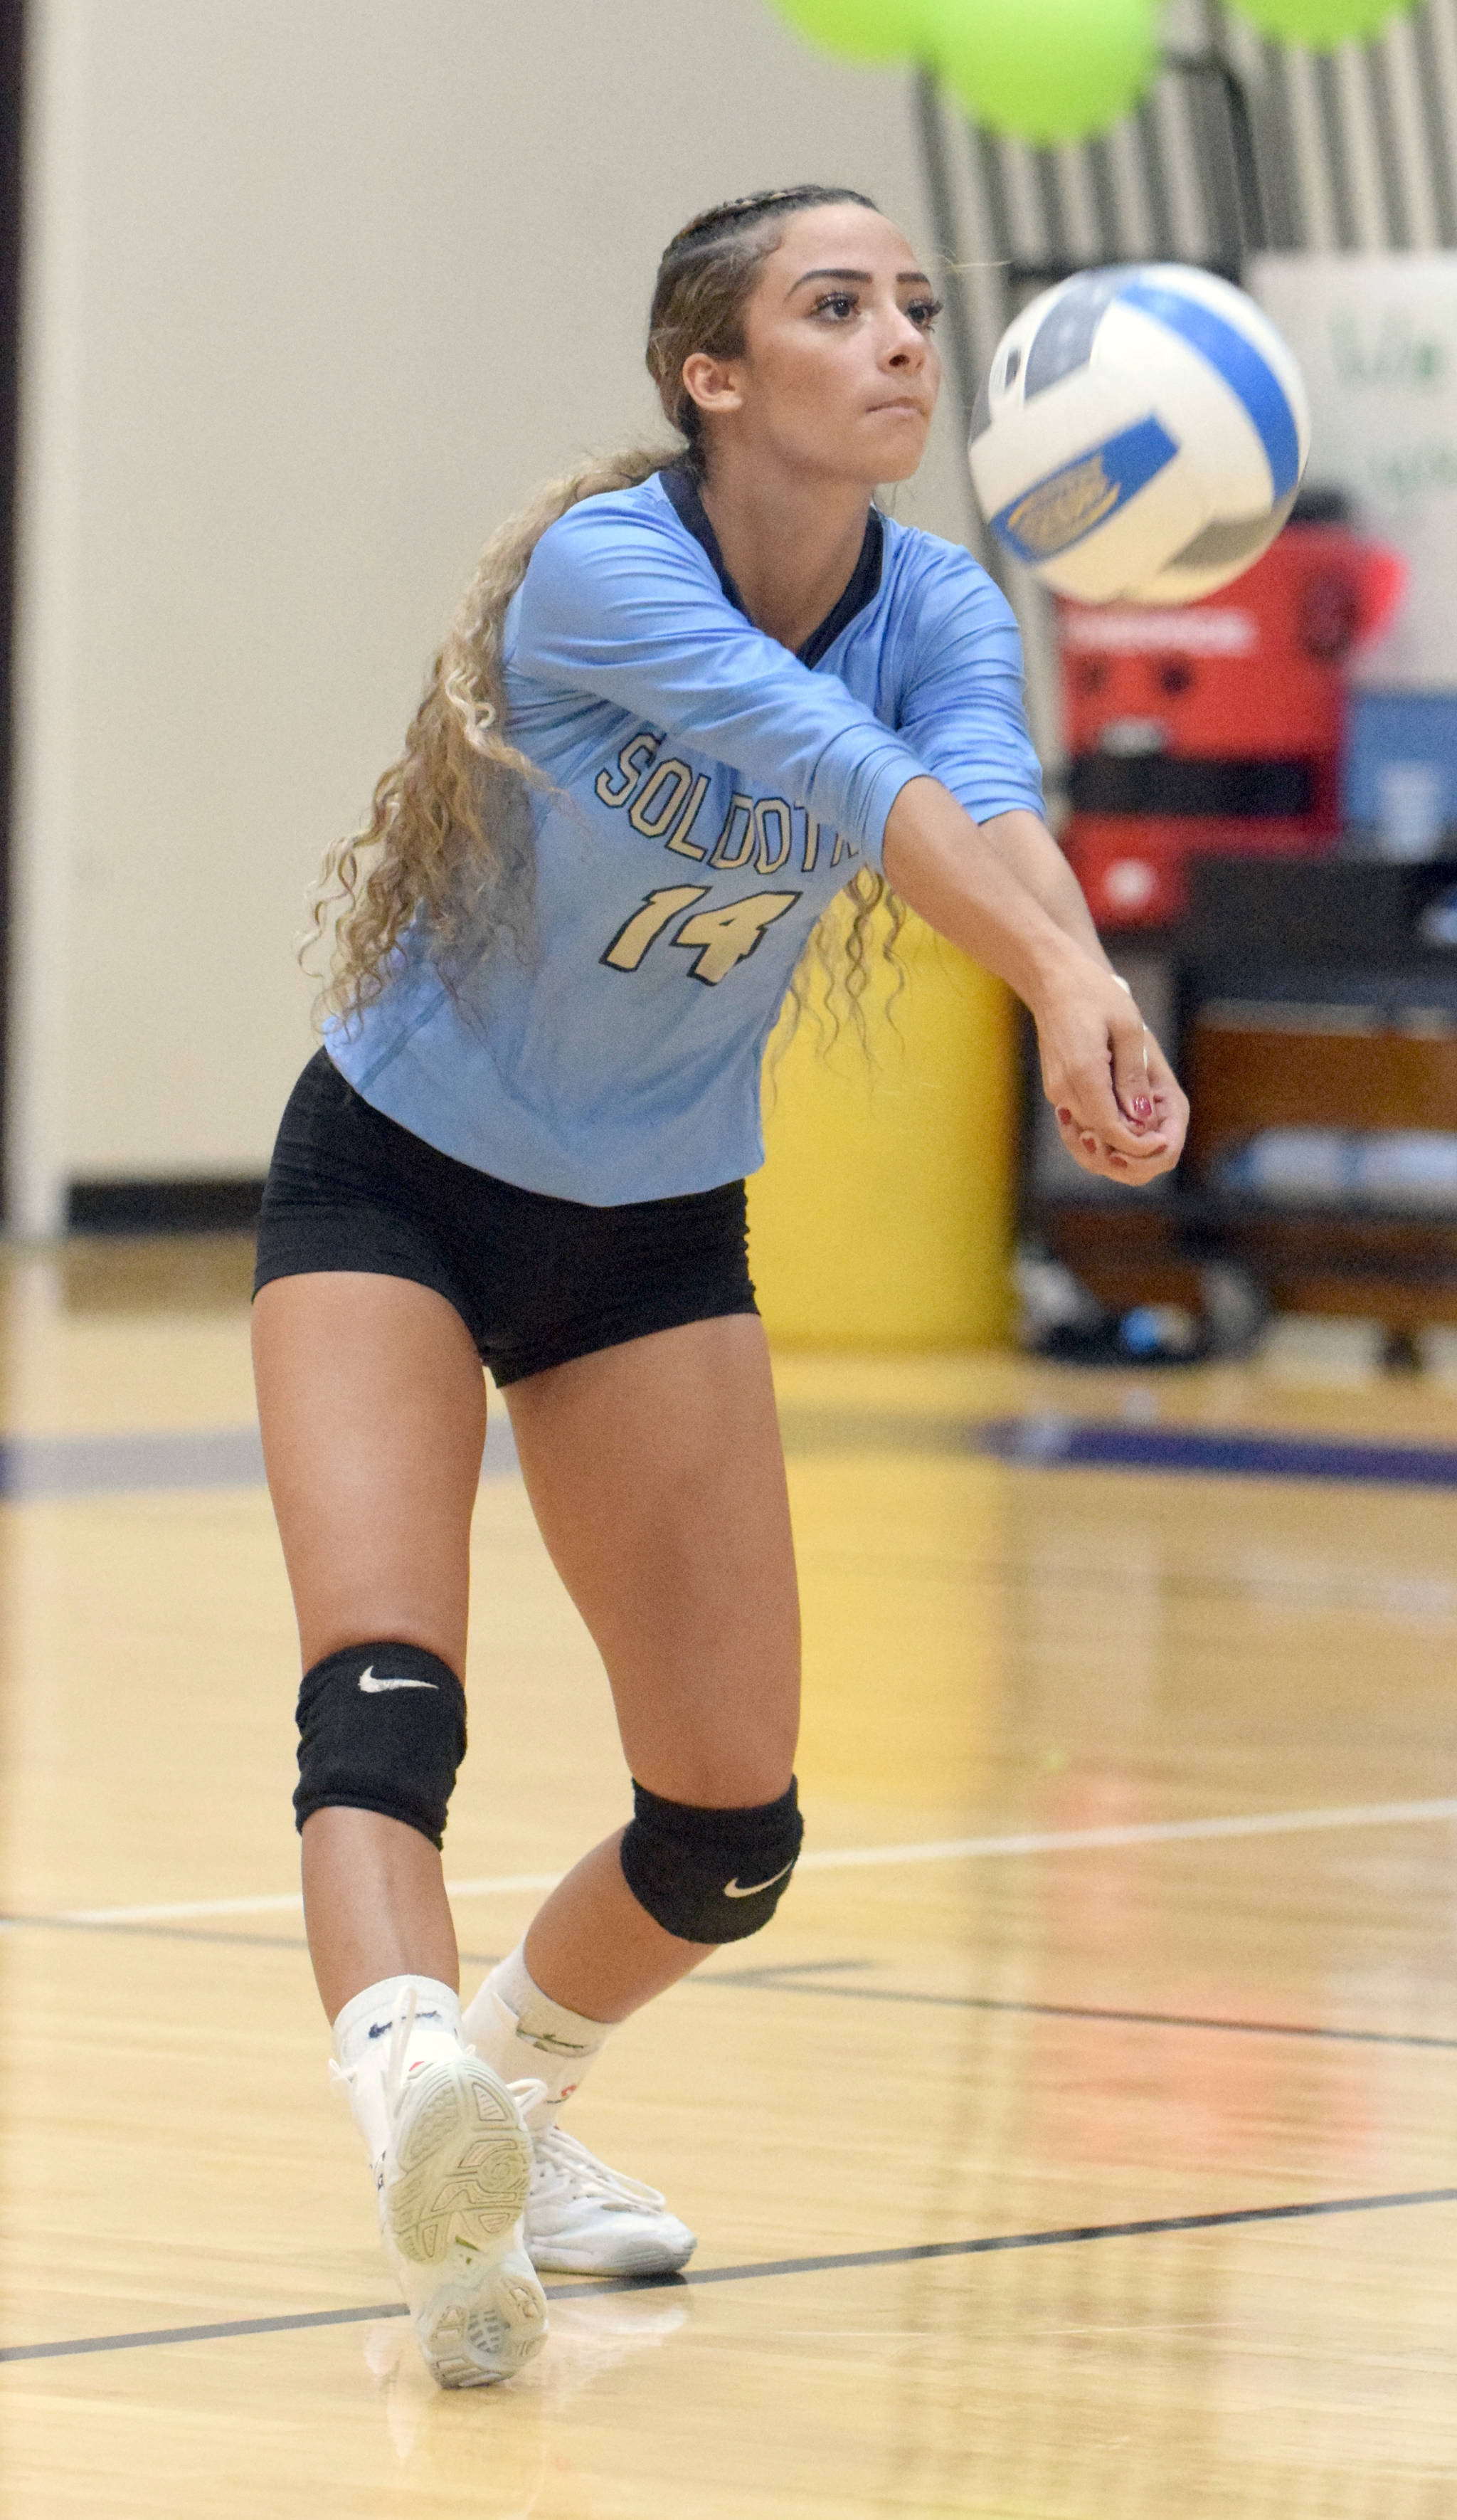 Soldotna’s Holleigh Jaime digs up a ball against Palmer on Friday, Sept. 13, 2019, at Soldotna High School in Soldotna, Alaska. (Photo by Jeff Helminiak/Peninsula Clarion)